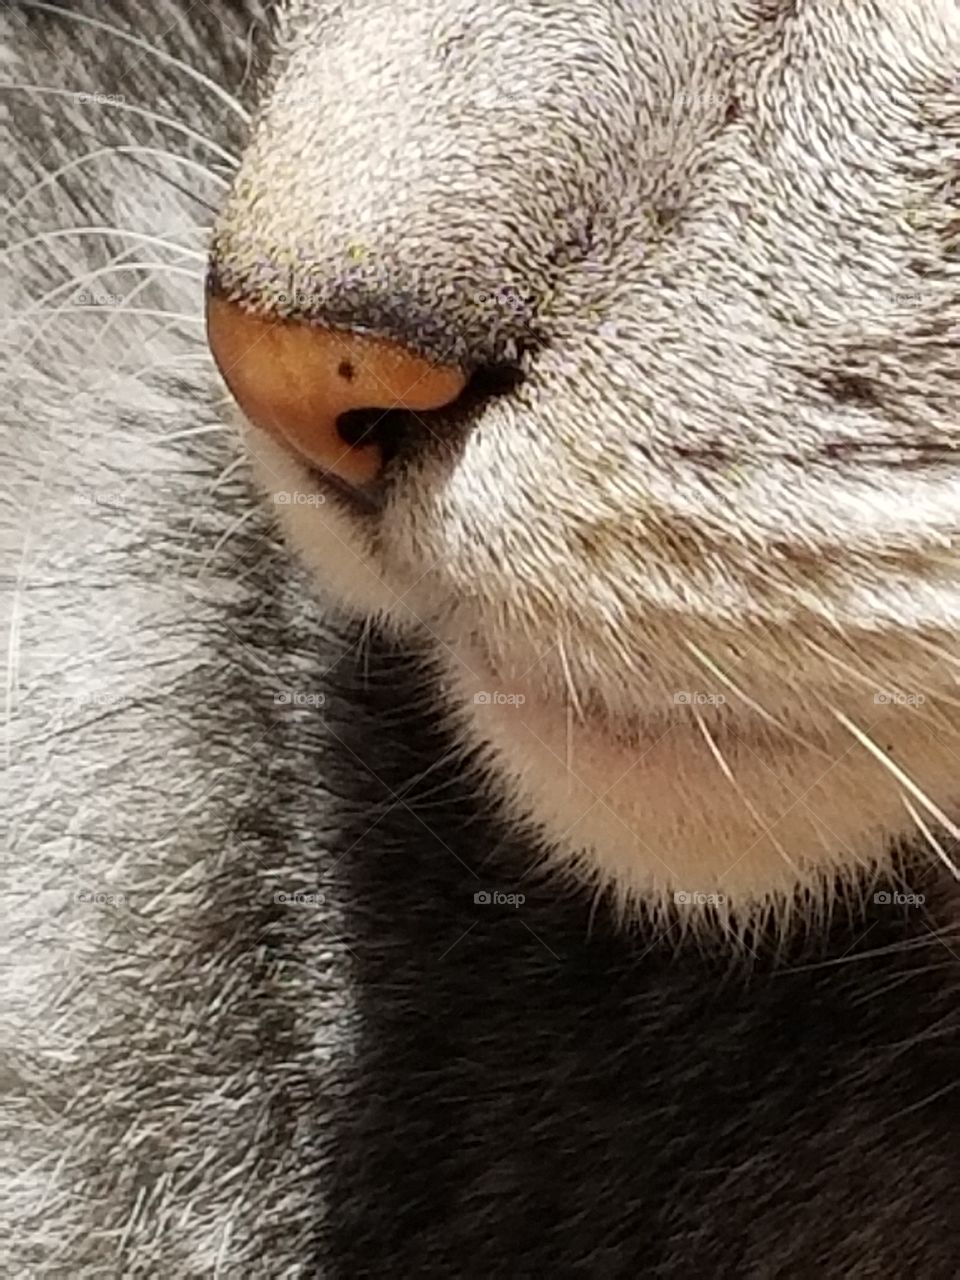 Kitty nose knows.